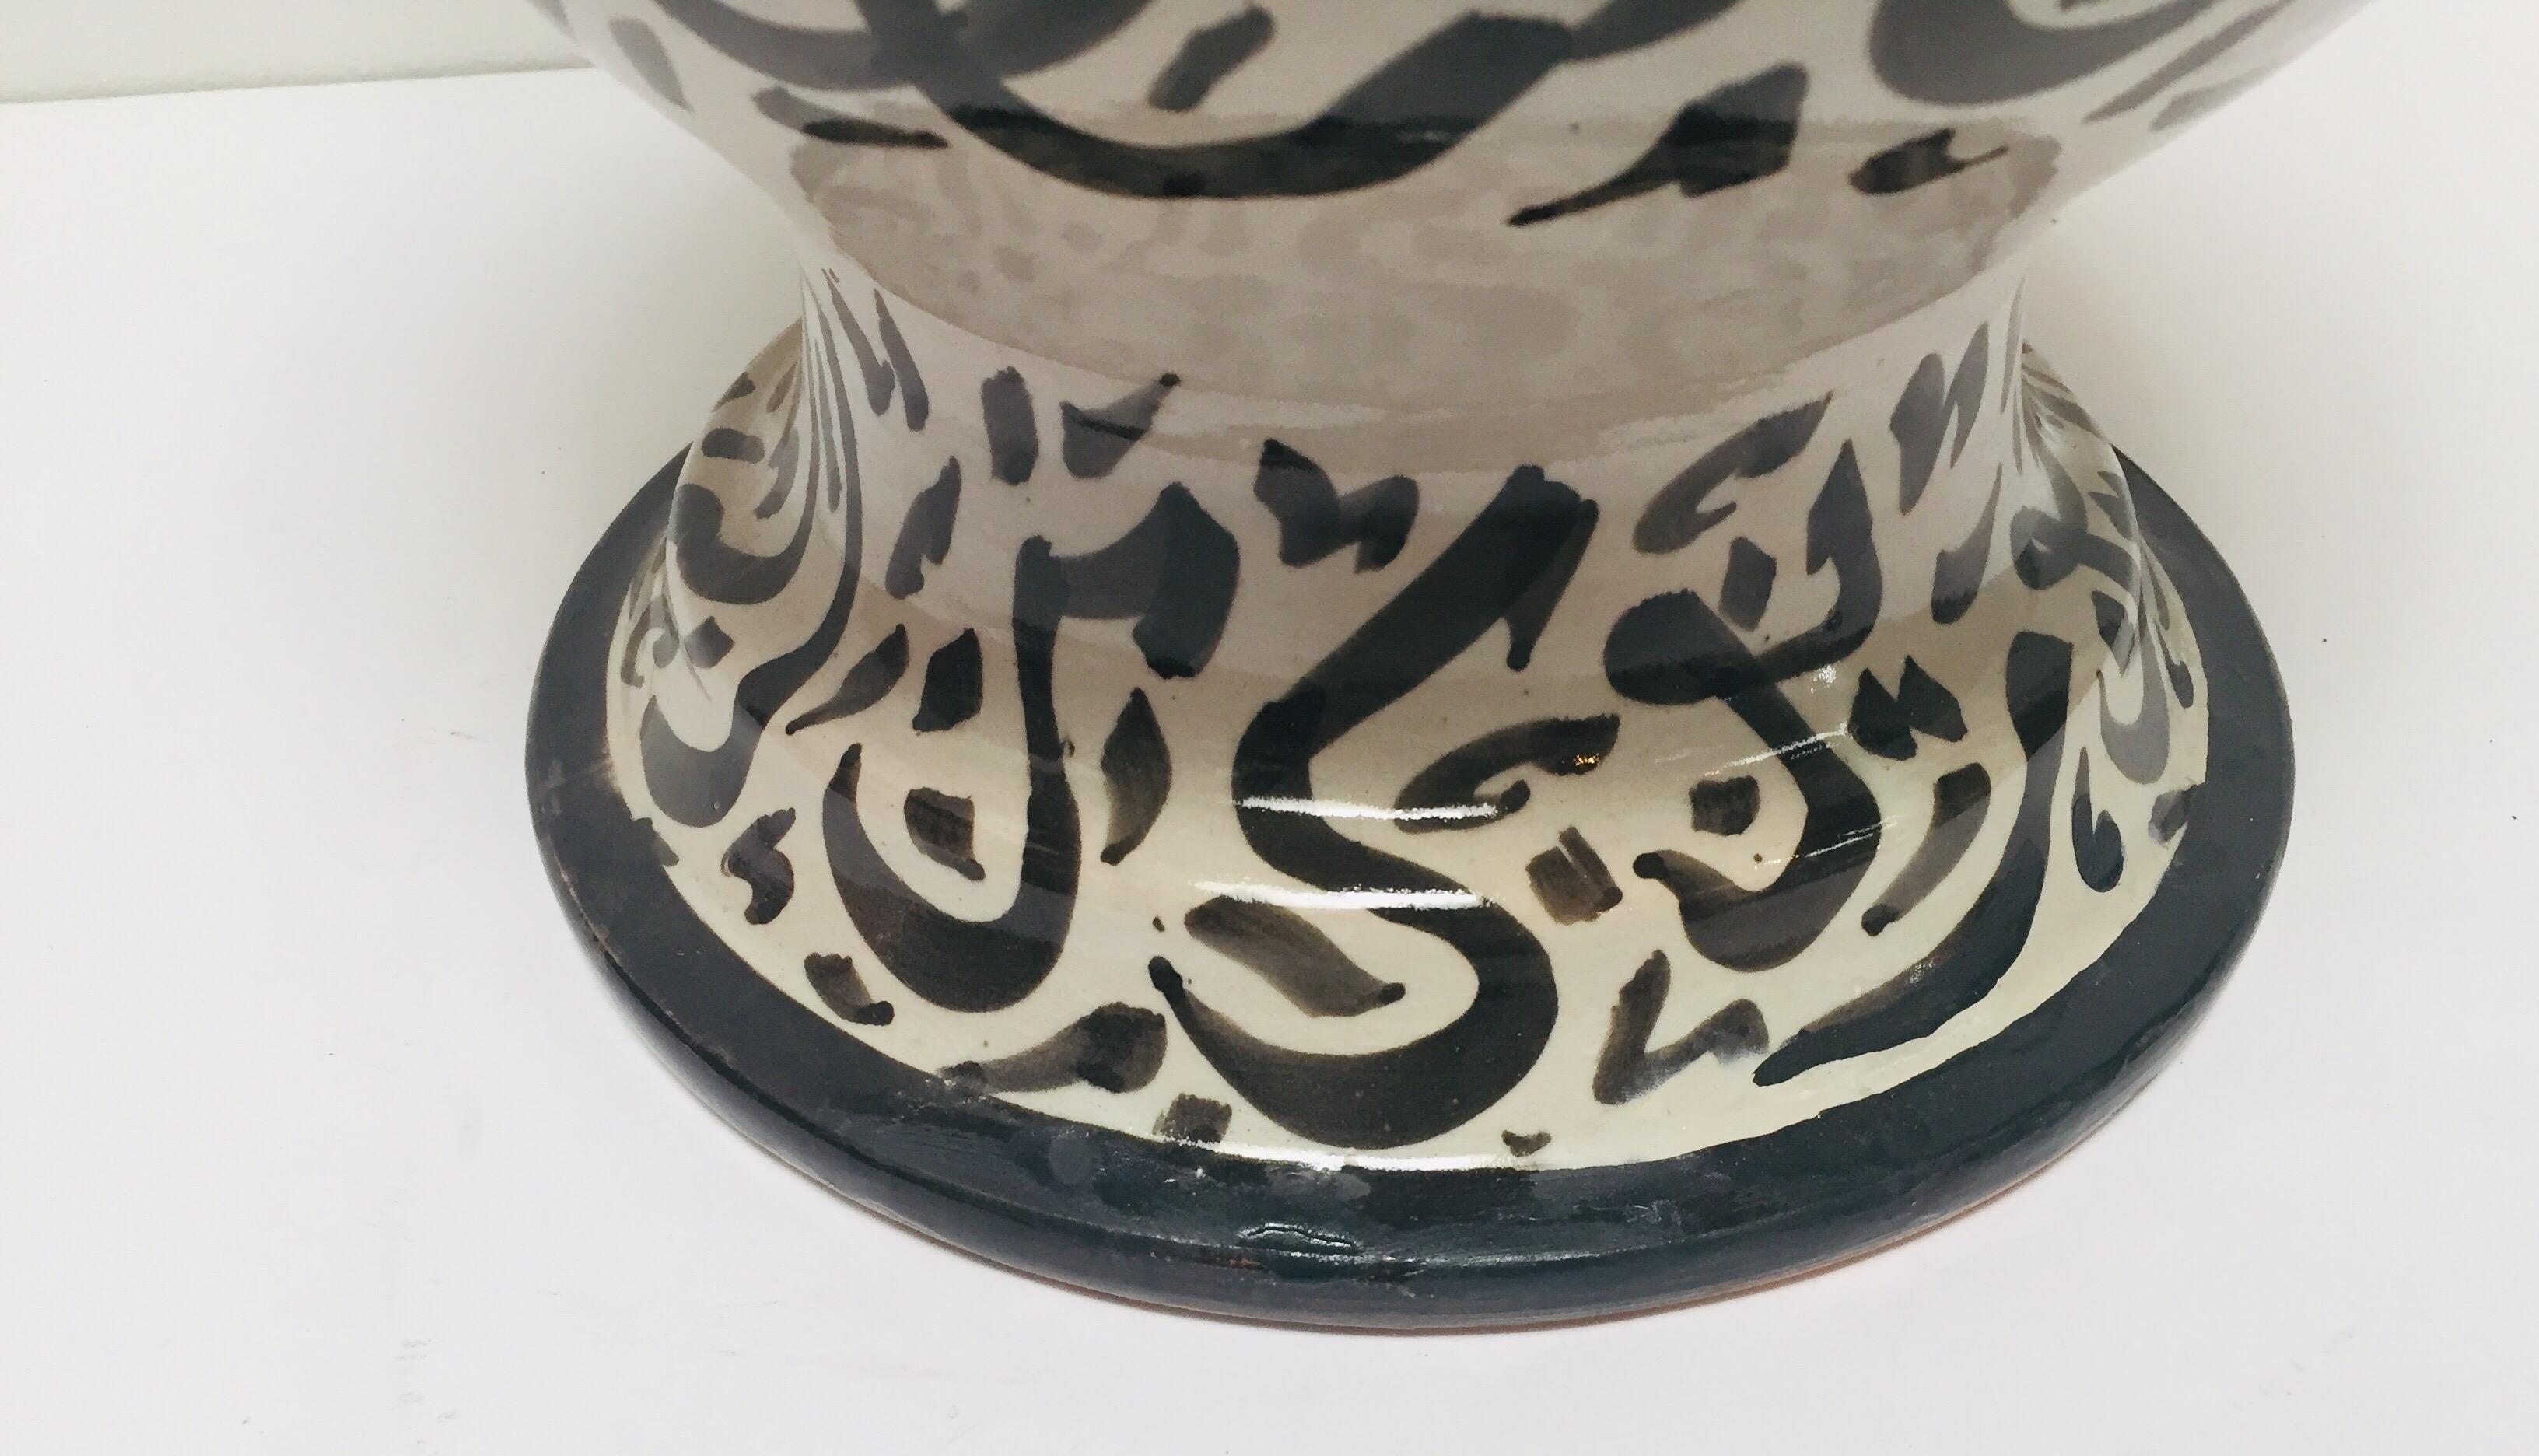 Large Moroccan Glazed Ceramic Vase with Arabic Calligraphy Brown Writing, Fez 8